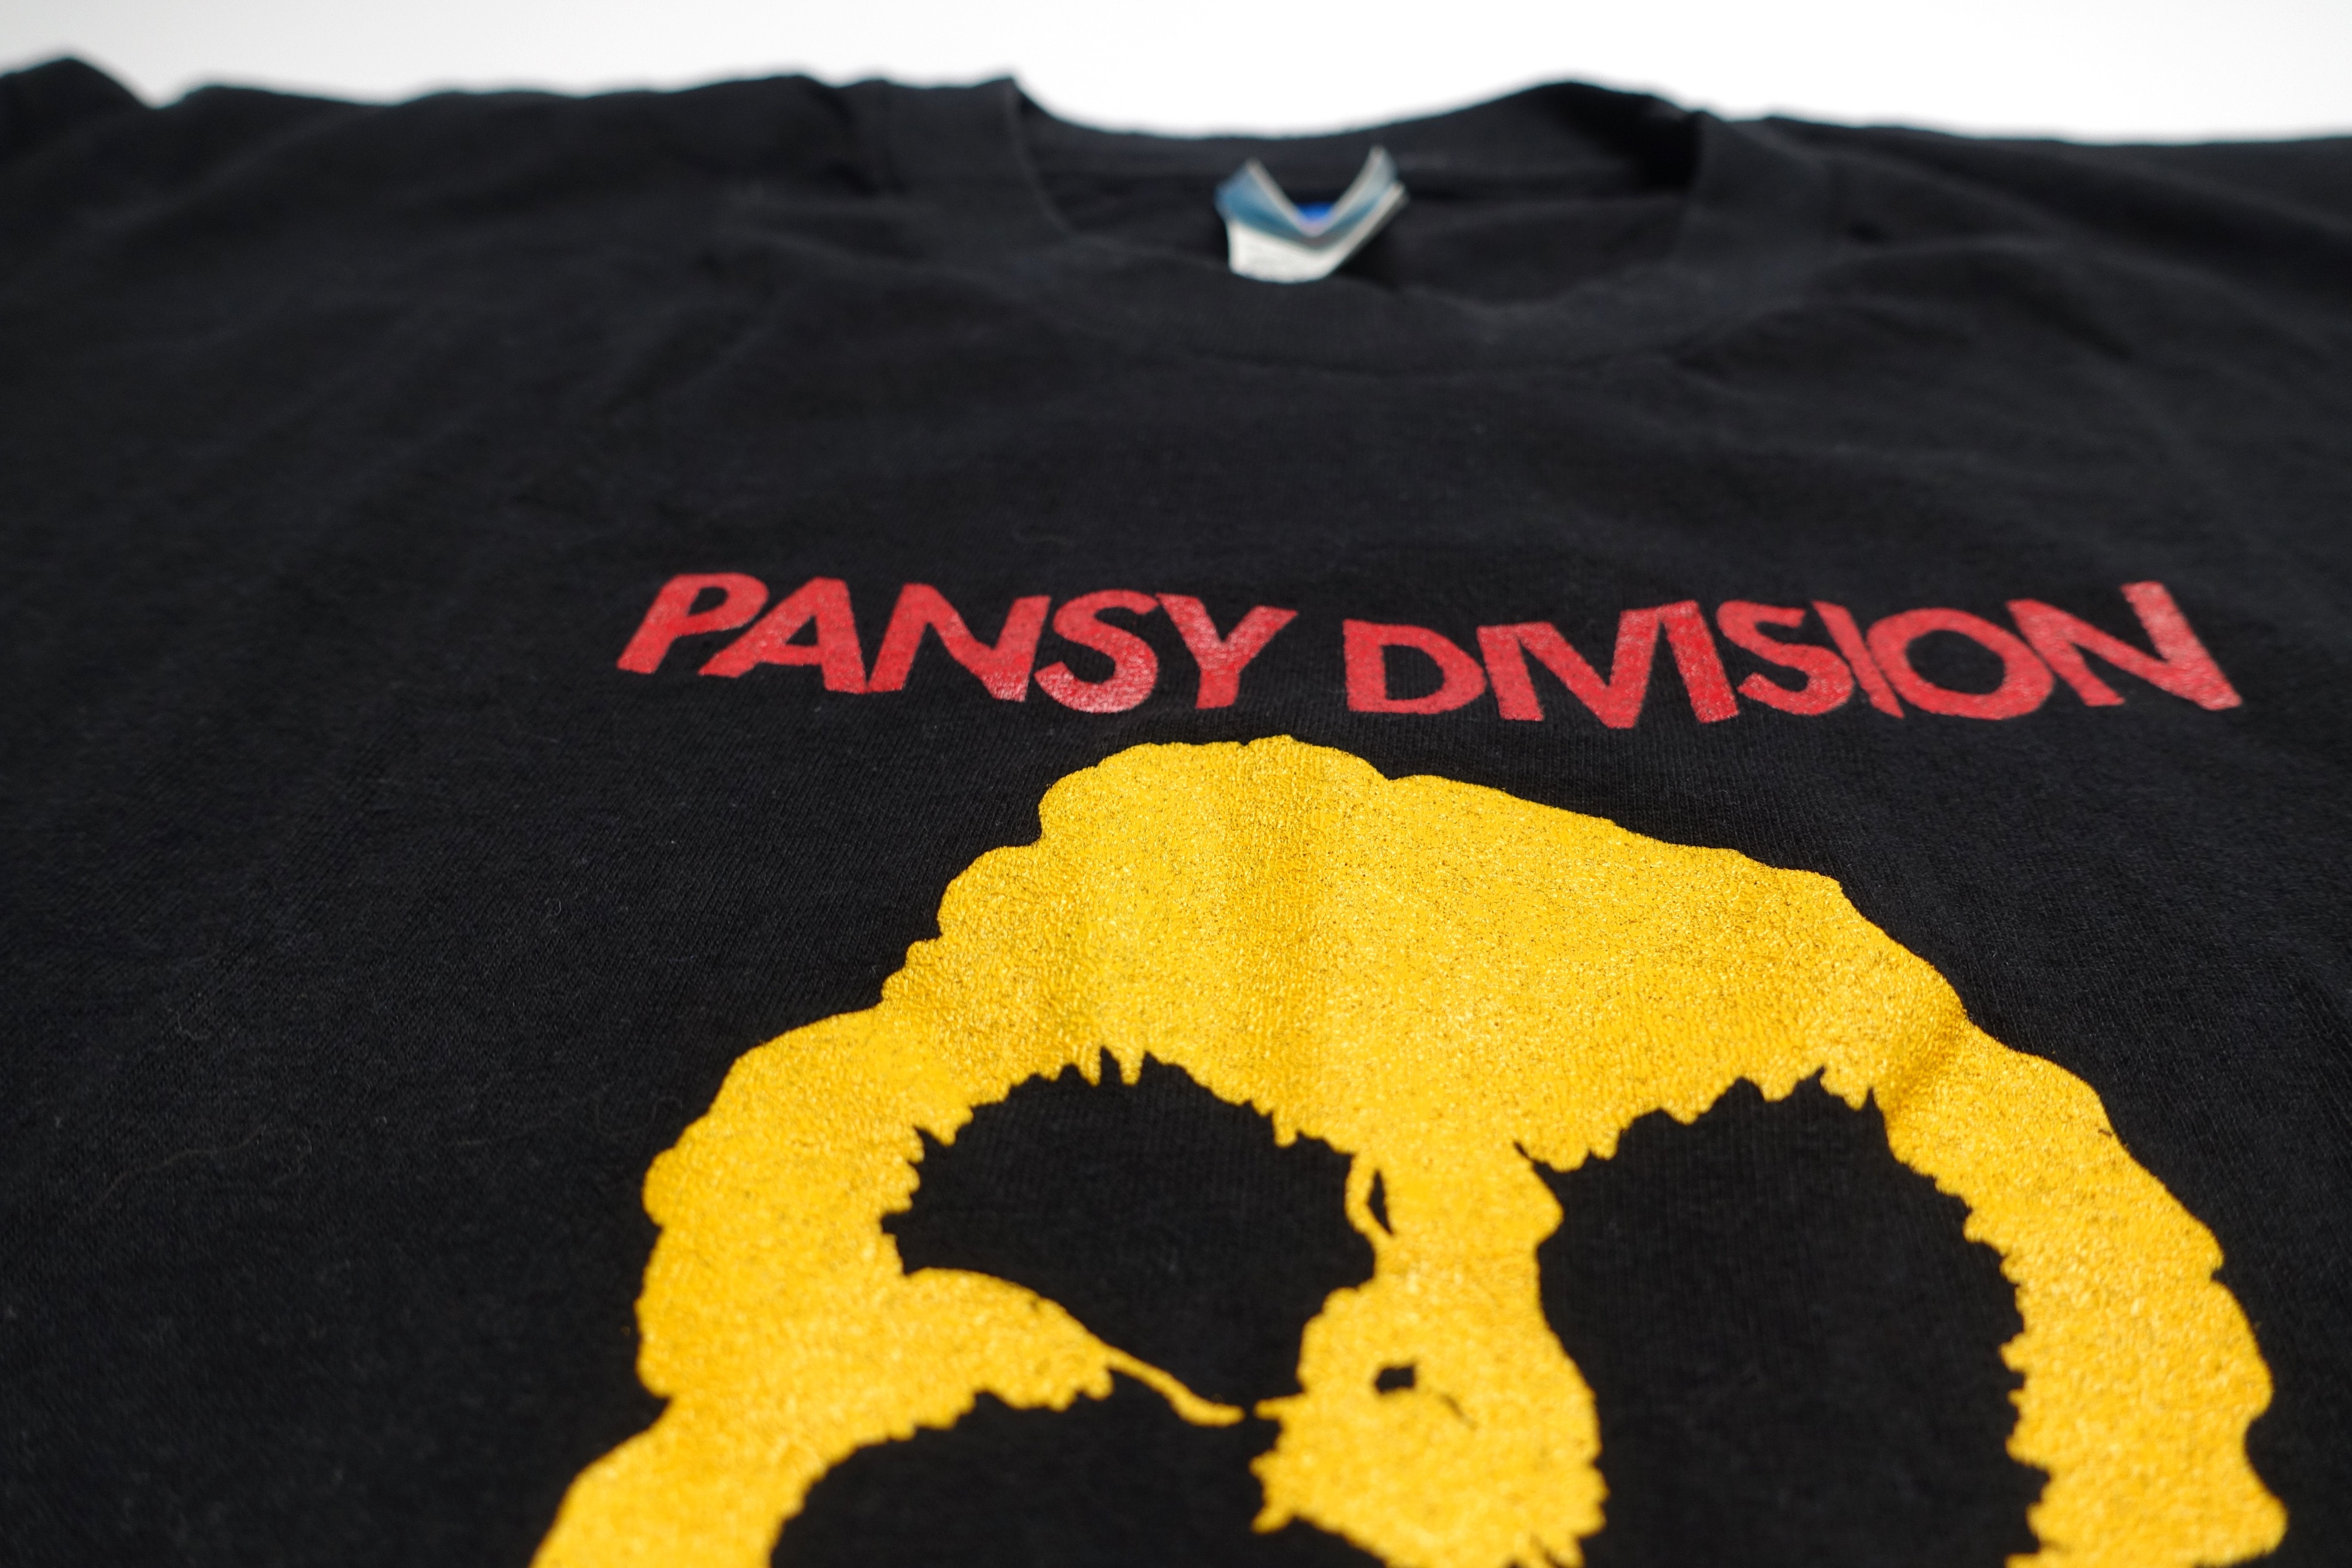 Pansy Division - Deflowered 1994 Tour Shirt Size Large